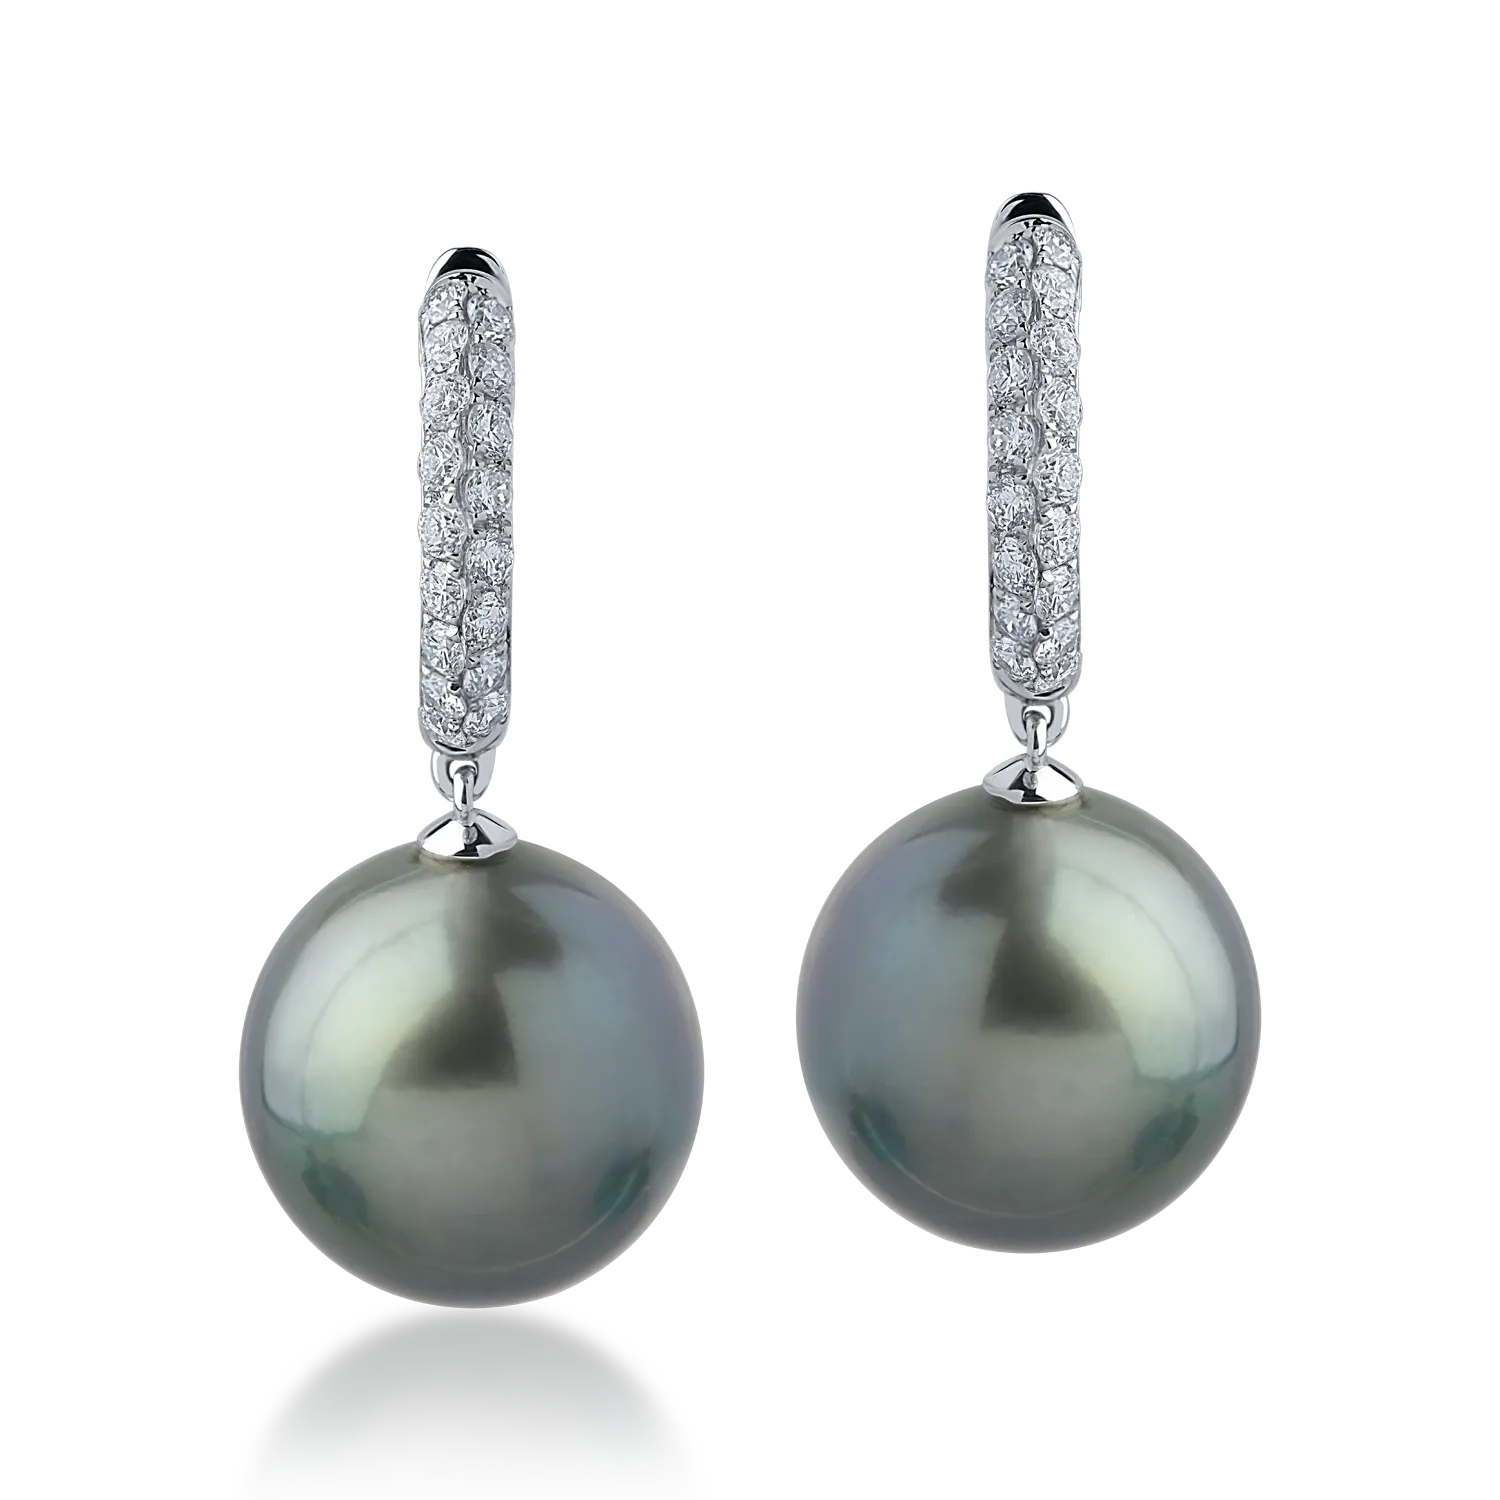 White gold earrings with 0.4ct diamonds and fresh water pearls